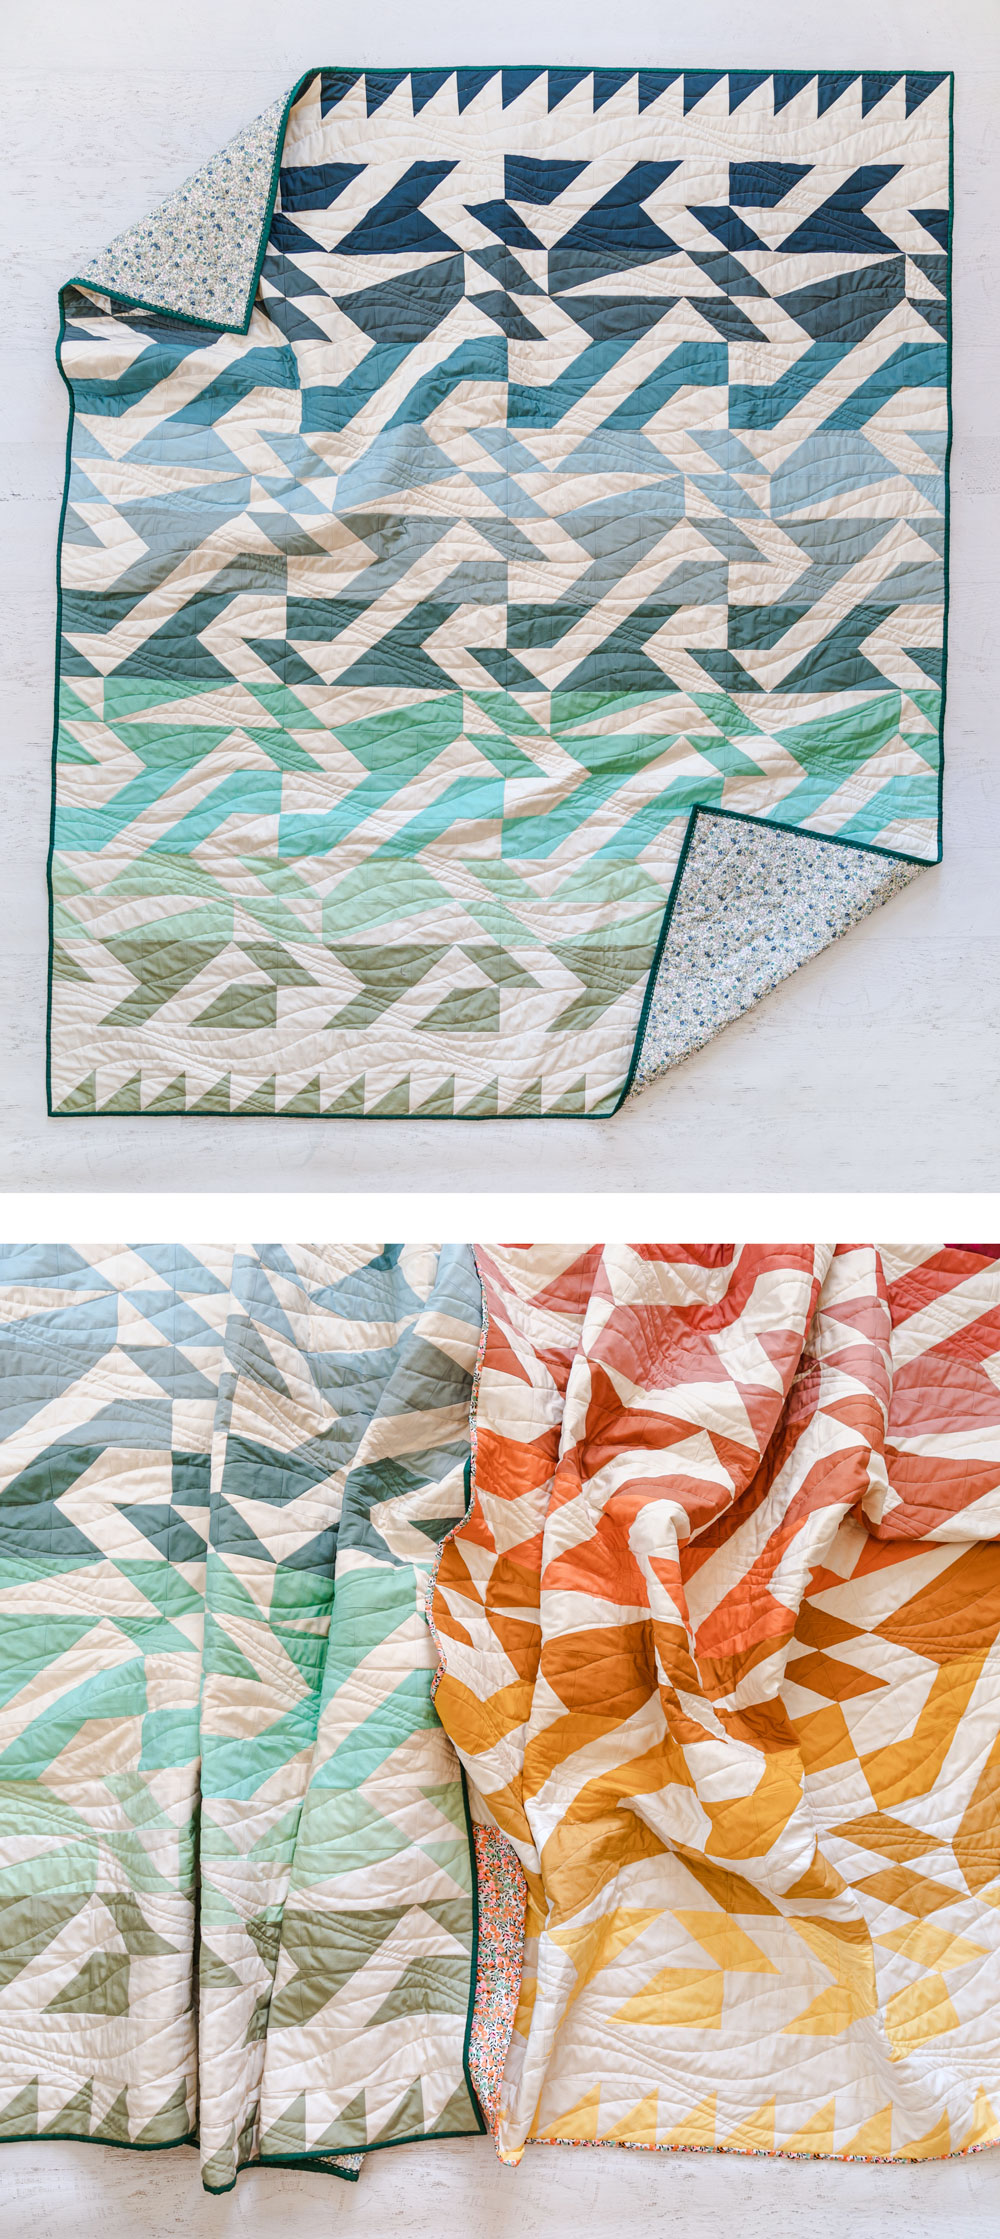 The Voyage quilt pattern is fat quarter friendly and a great quilt pattern for beginners – includes lots of extra video tutorials. suzyquilts.com #ombrequilt #quiltpattern